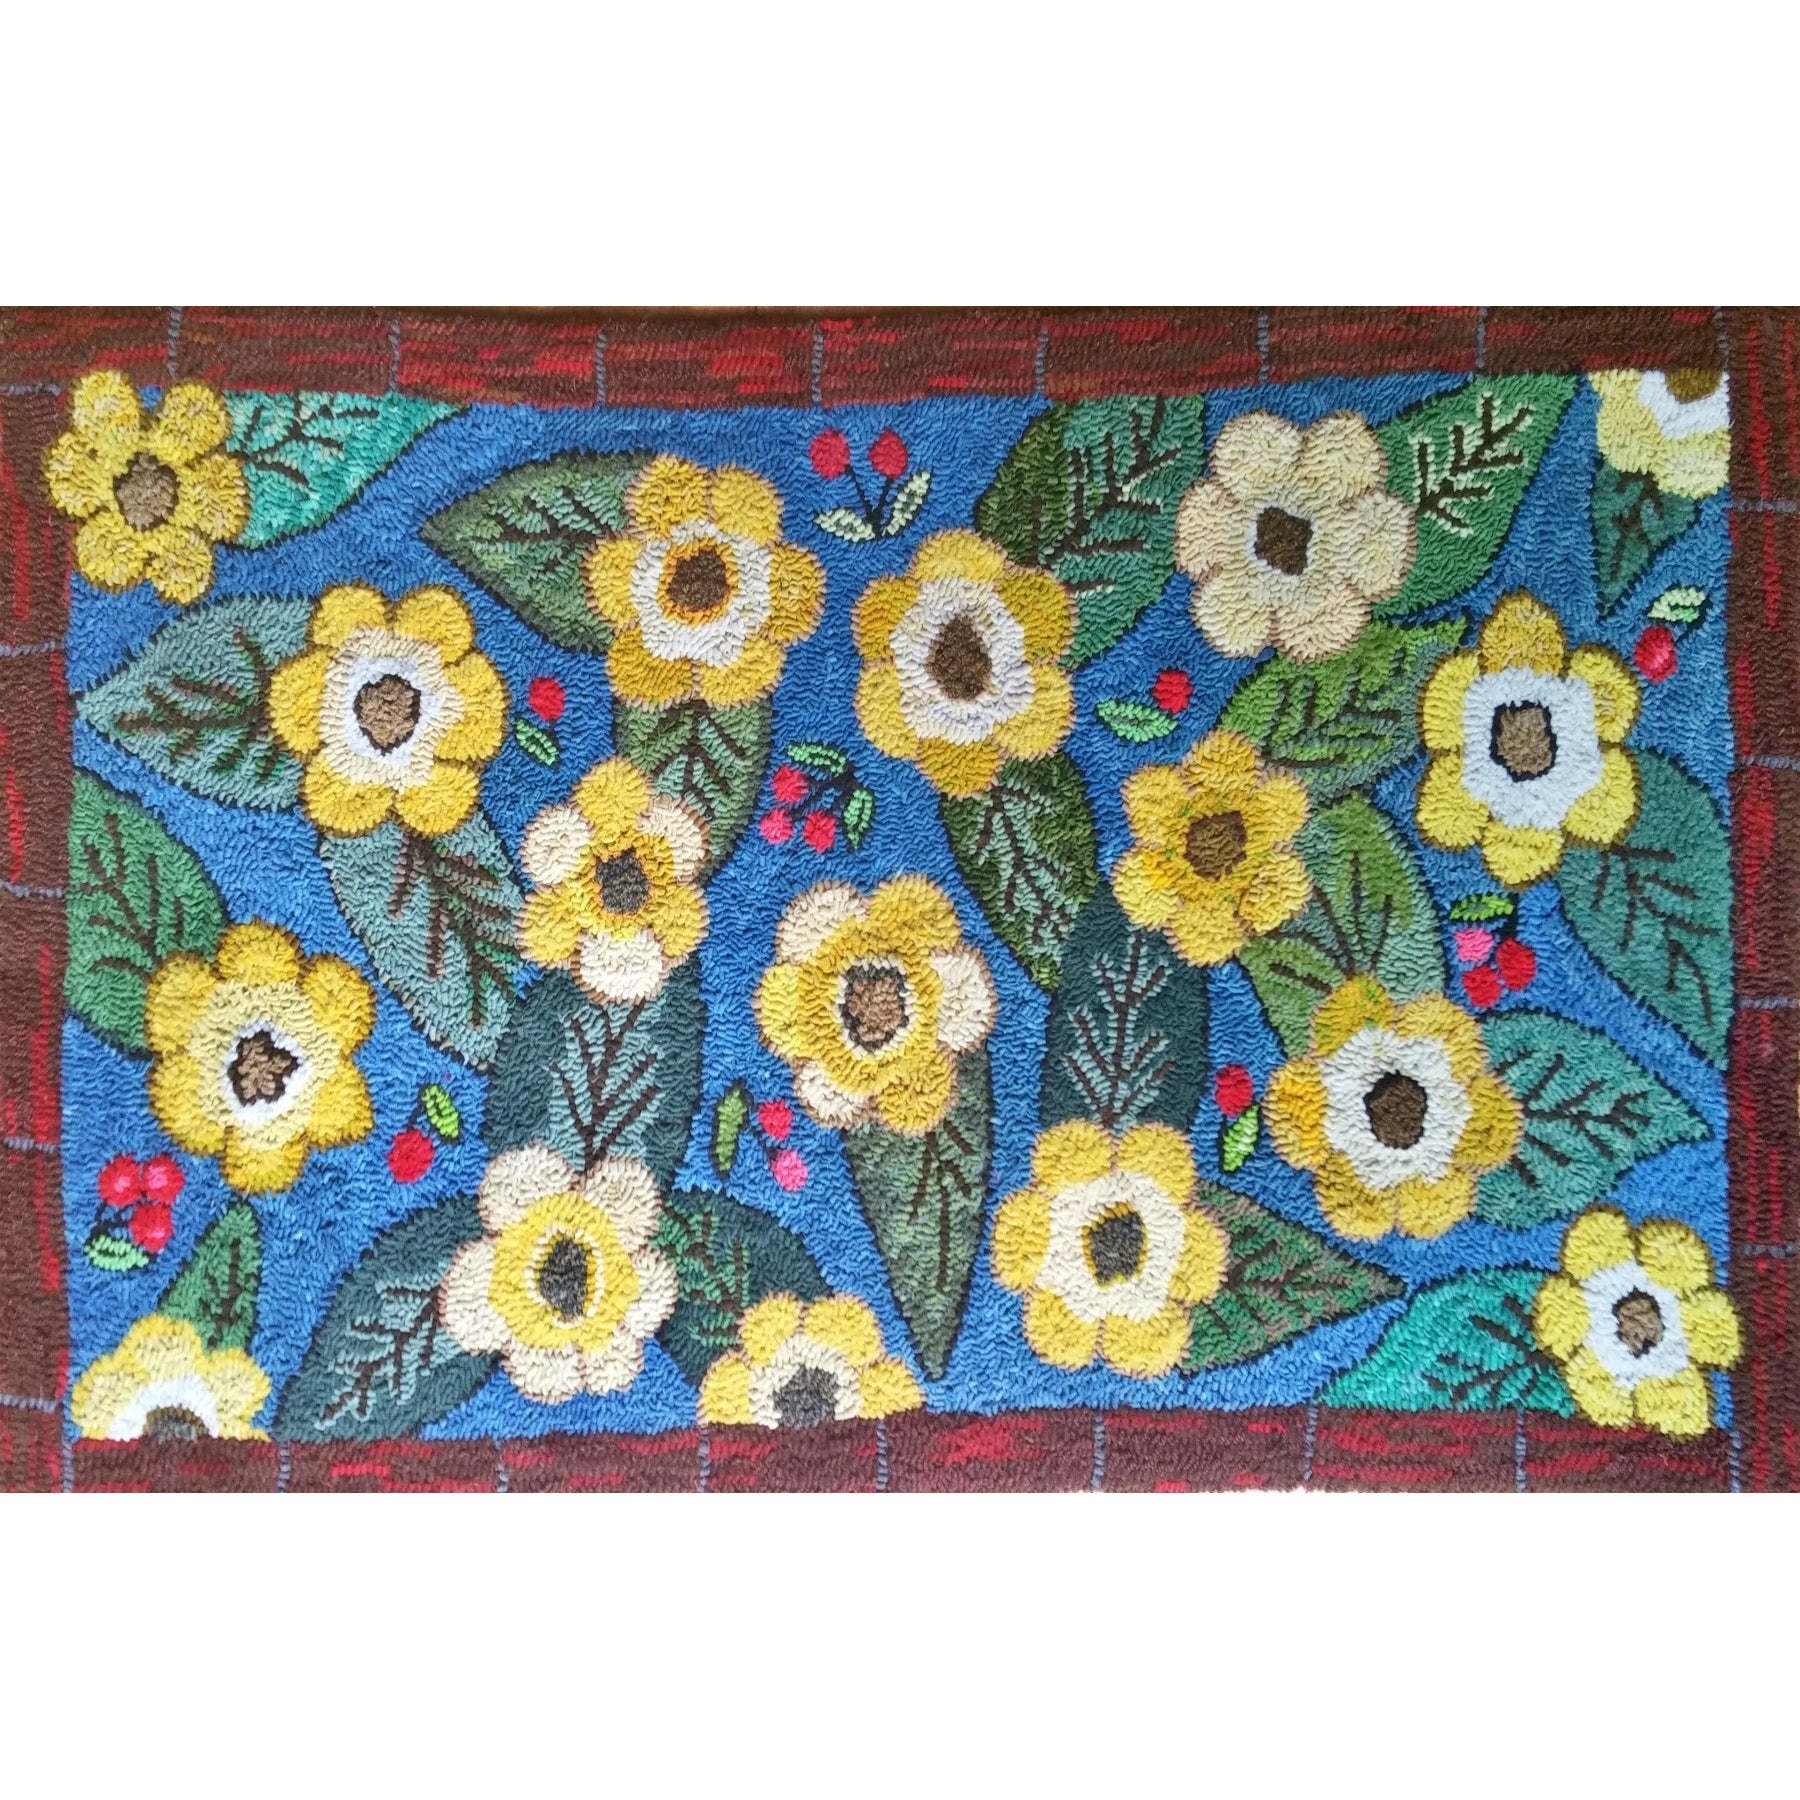 Floral Fantasy, rug hooked by Cheryl Roberts